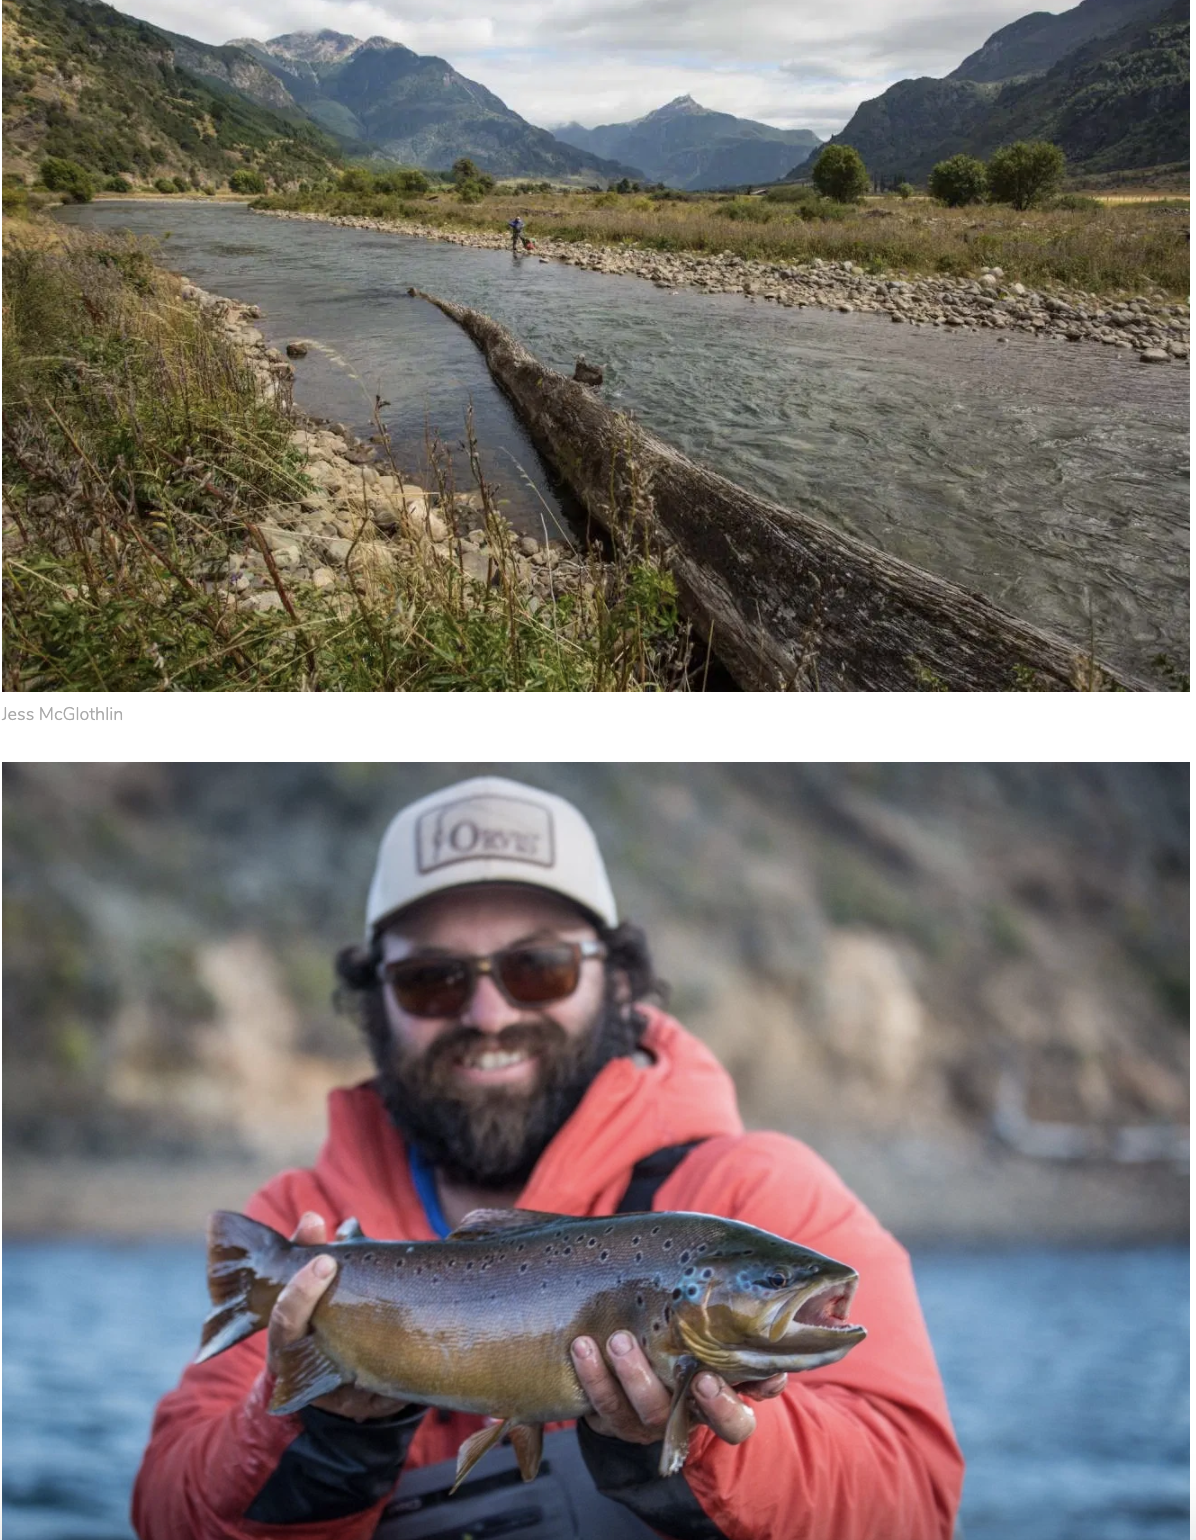 Man fishing a river in Chile and man holding trout caught while fly fishing in Chile.